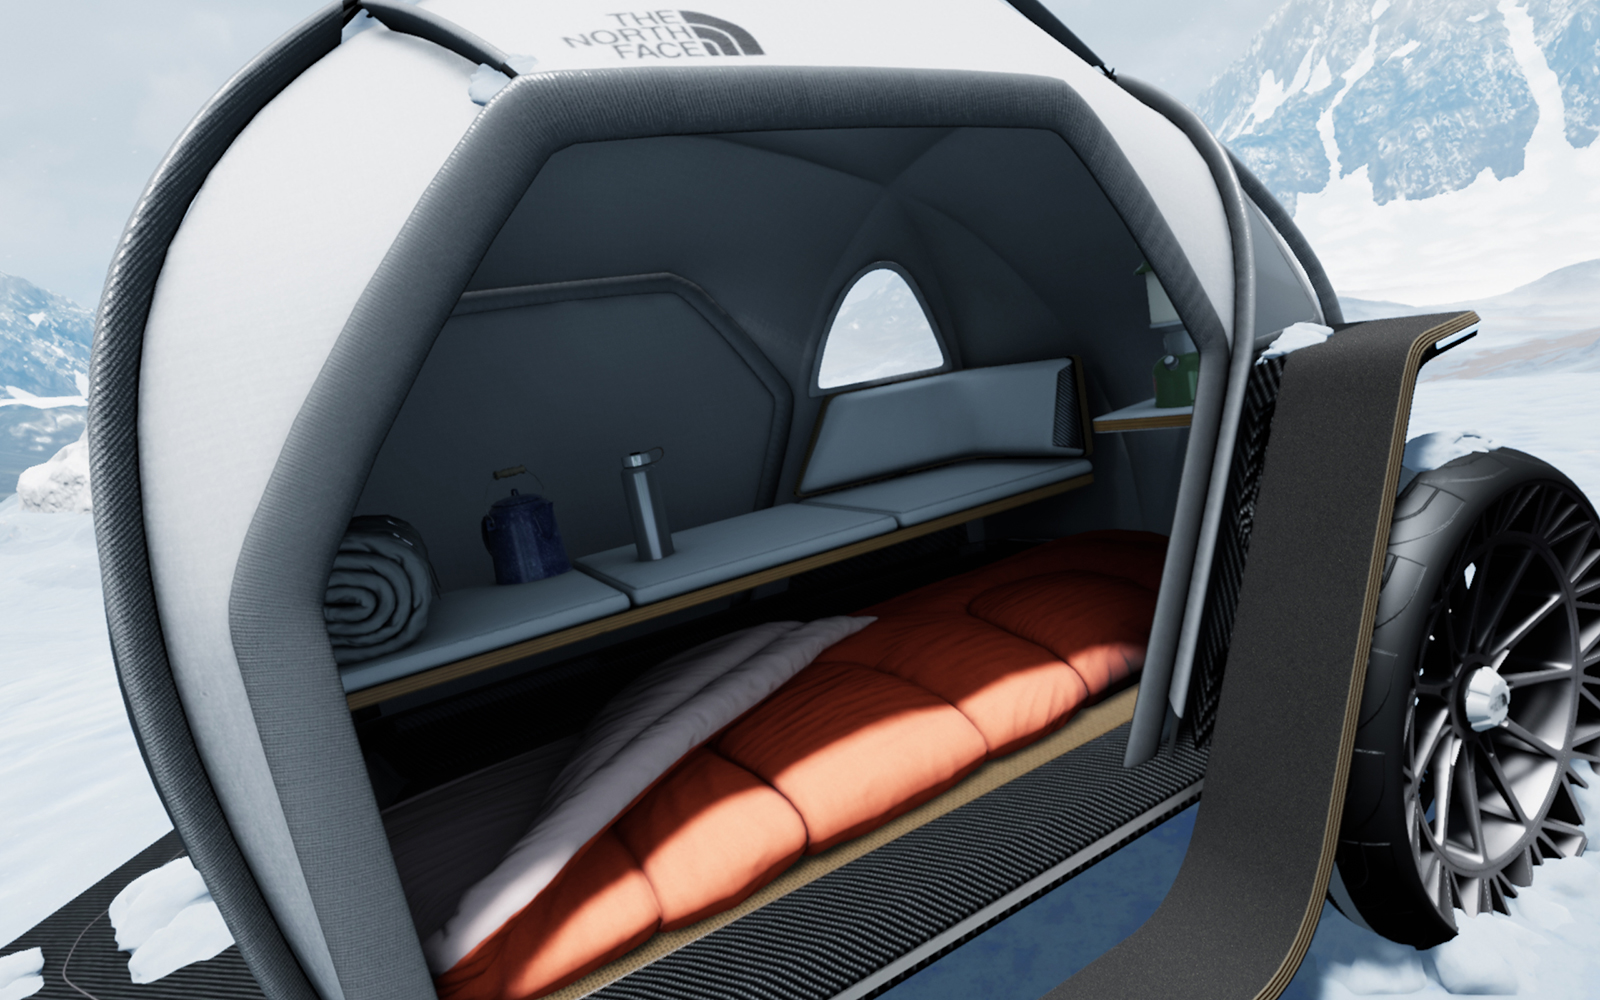 BMW teams up with The North Face on a futuristic element-proof camper